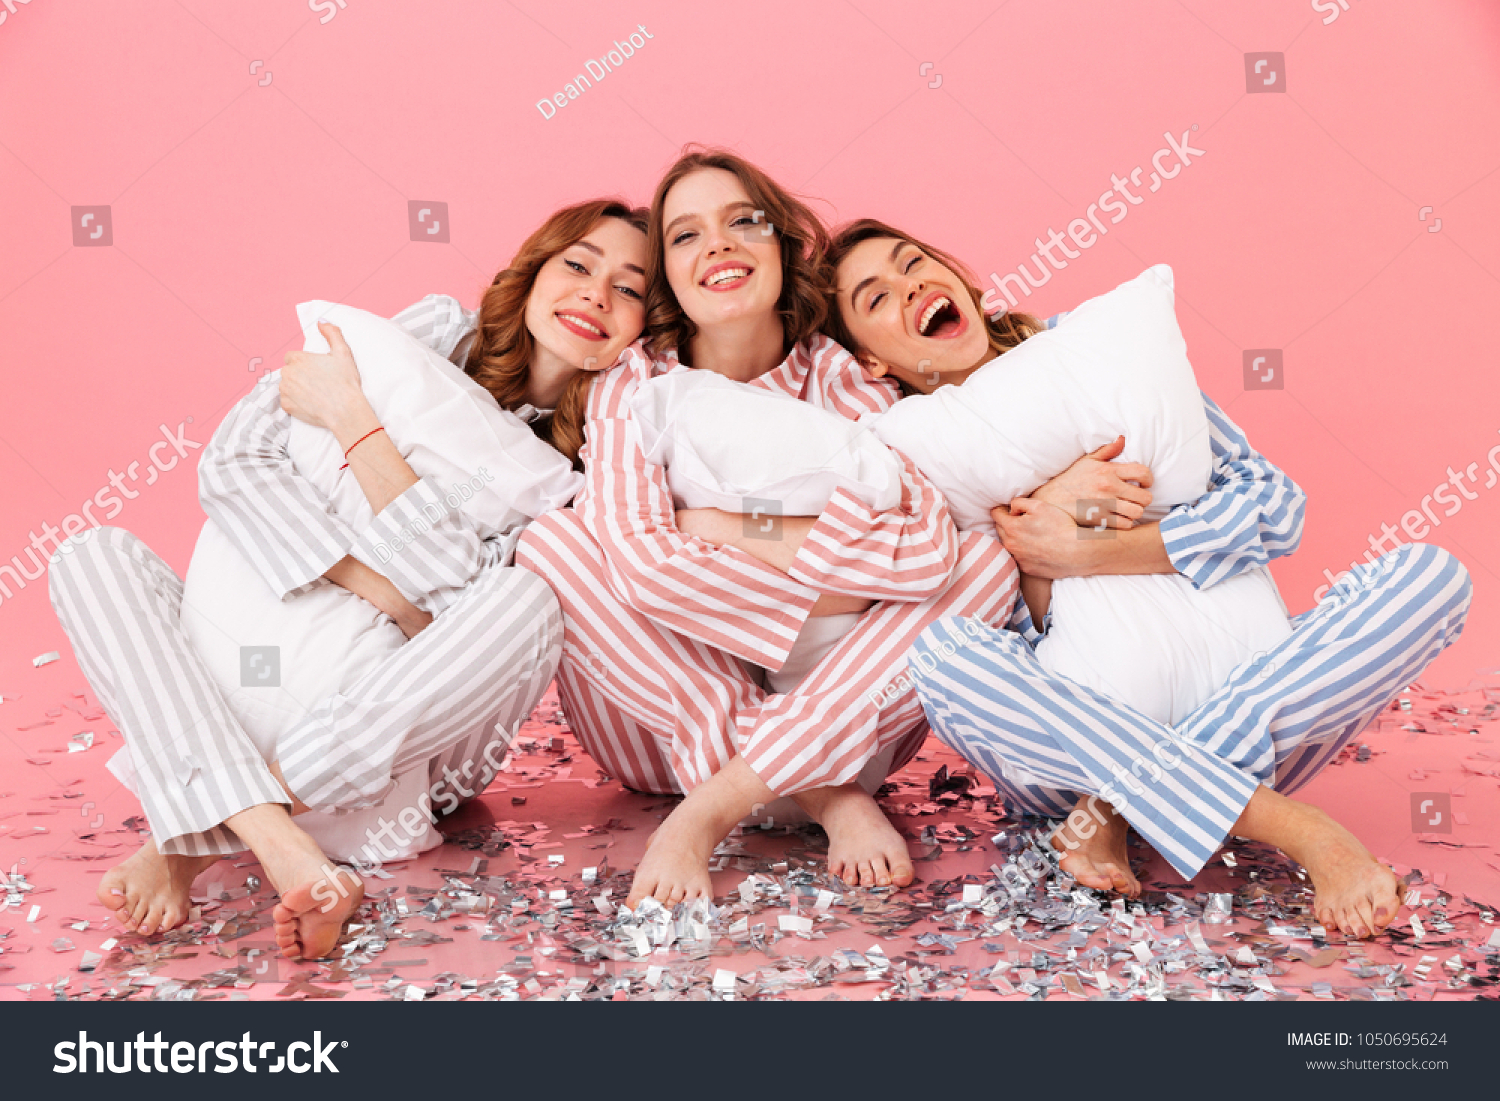 Attractive women 20s wearing leisure clothings sitting barefoot on floor with legs crossed and hugging pillows during girlish sleepover isolated over pink background #1050695624